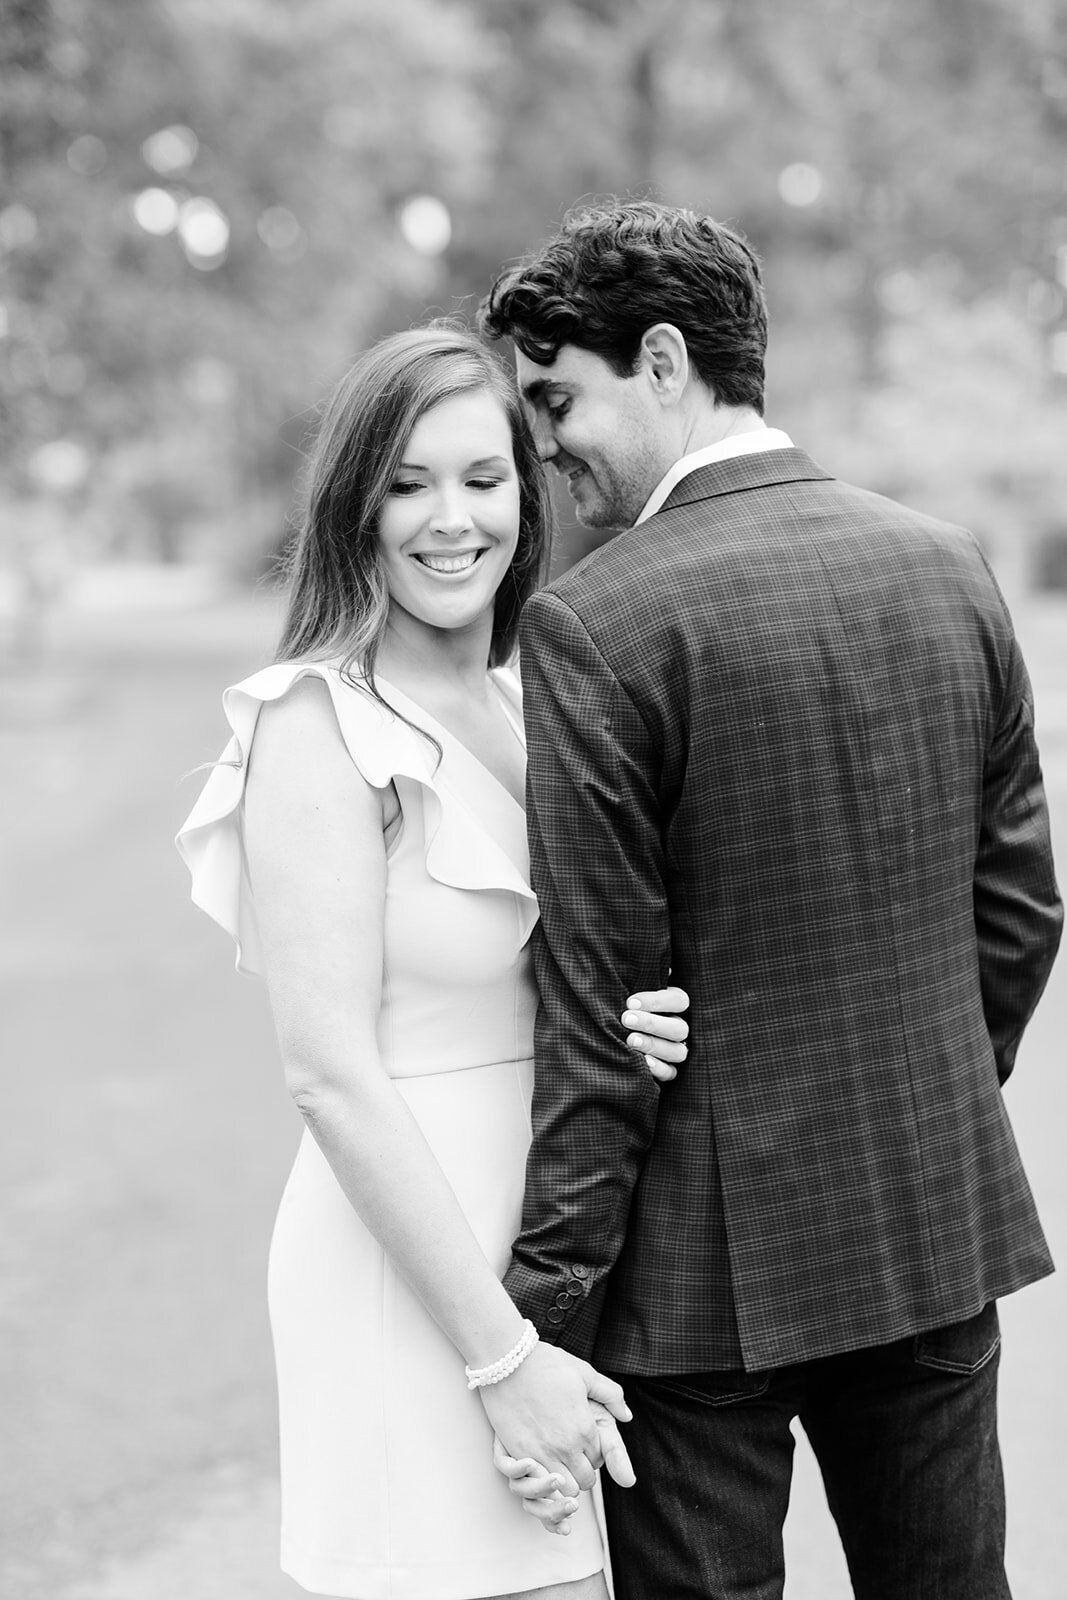 Engagement portrait in black and white